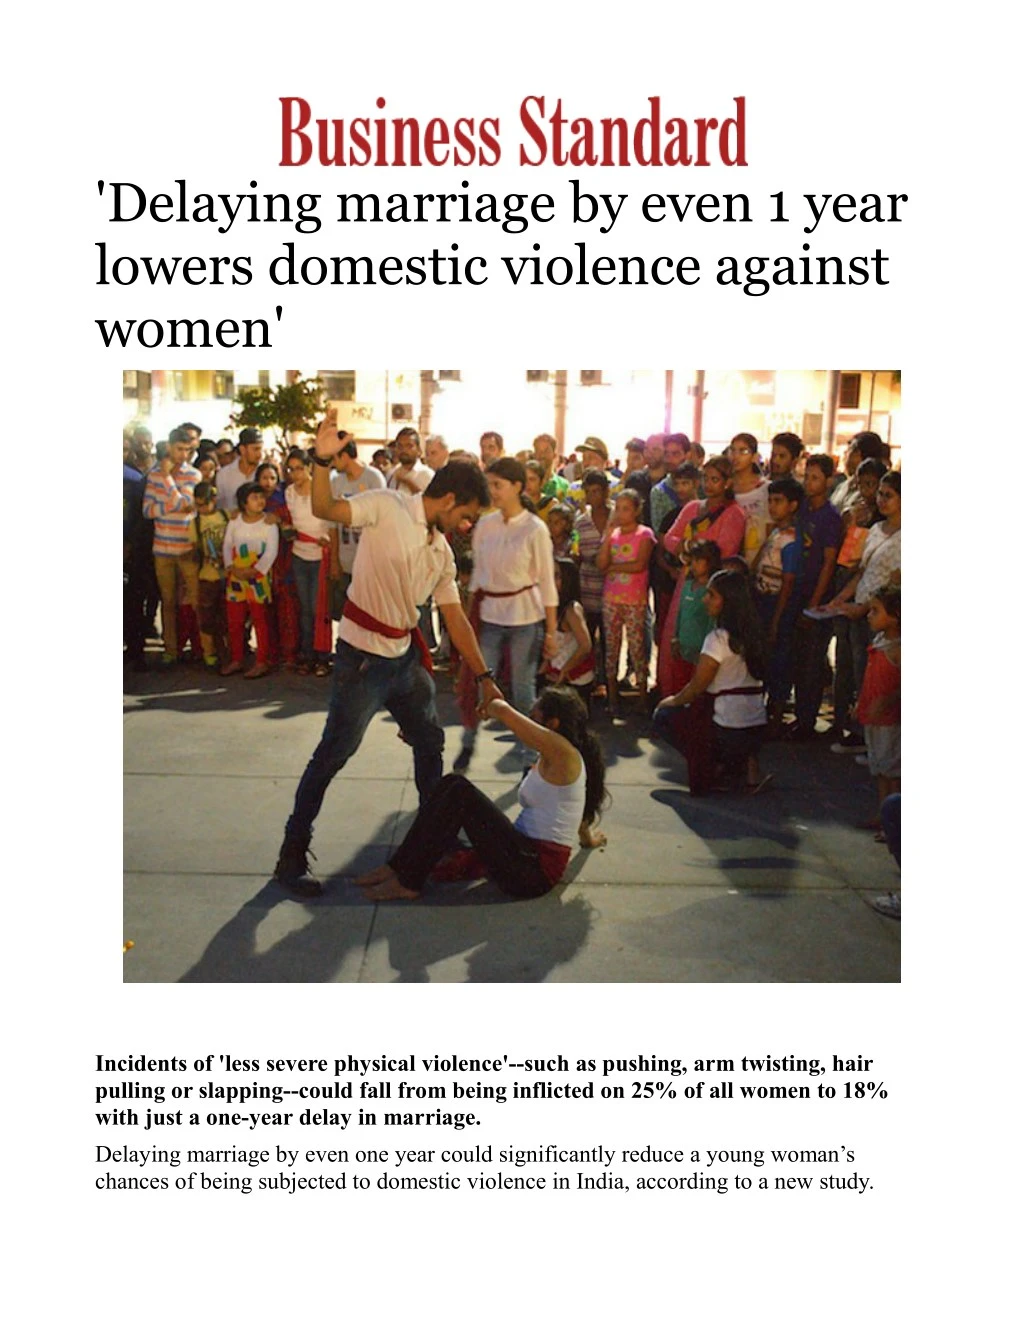 delaying marriage by even 1 year lowers domestic